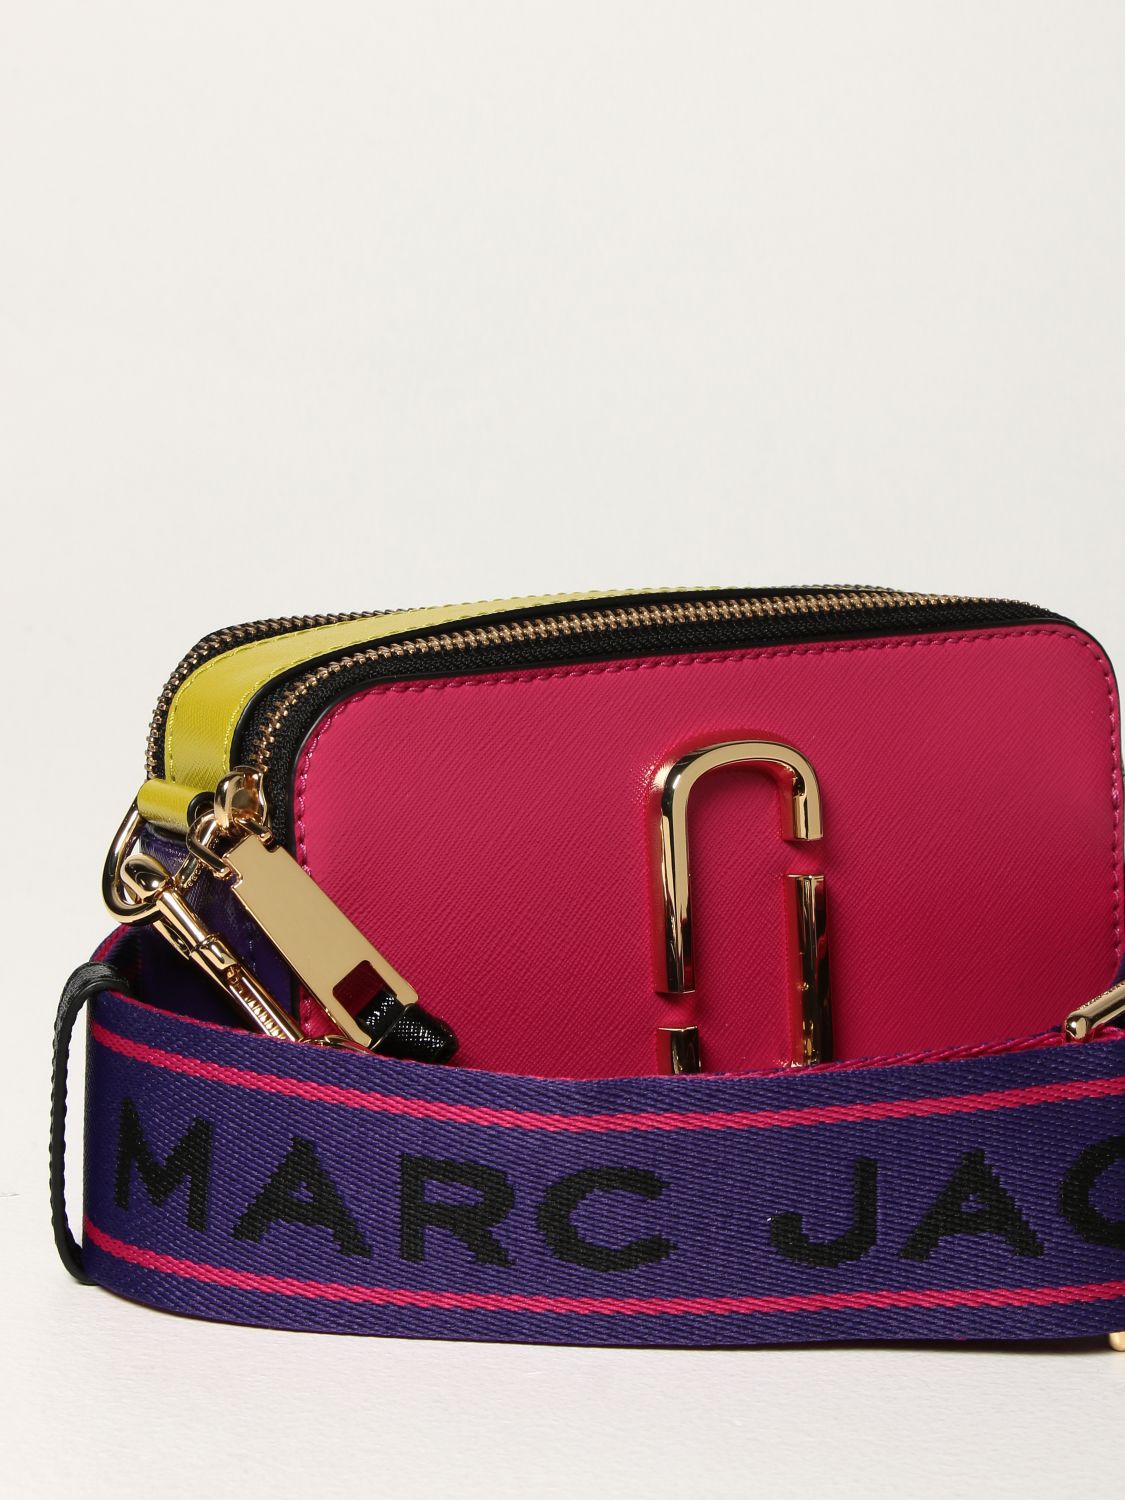 MARC JACOBS: The Snapshot bag in tricolor saffiano leather - Apple Green |  Marc Jacobs crossbody bags M0012007 online at